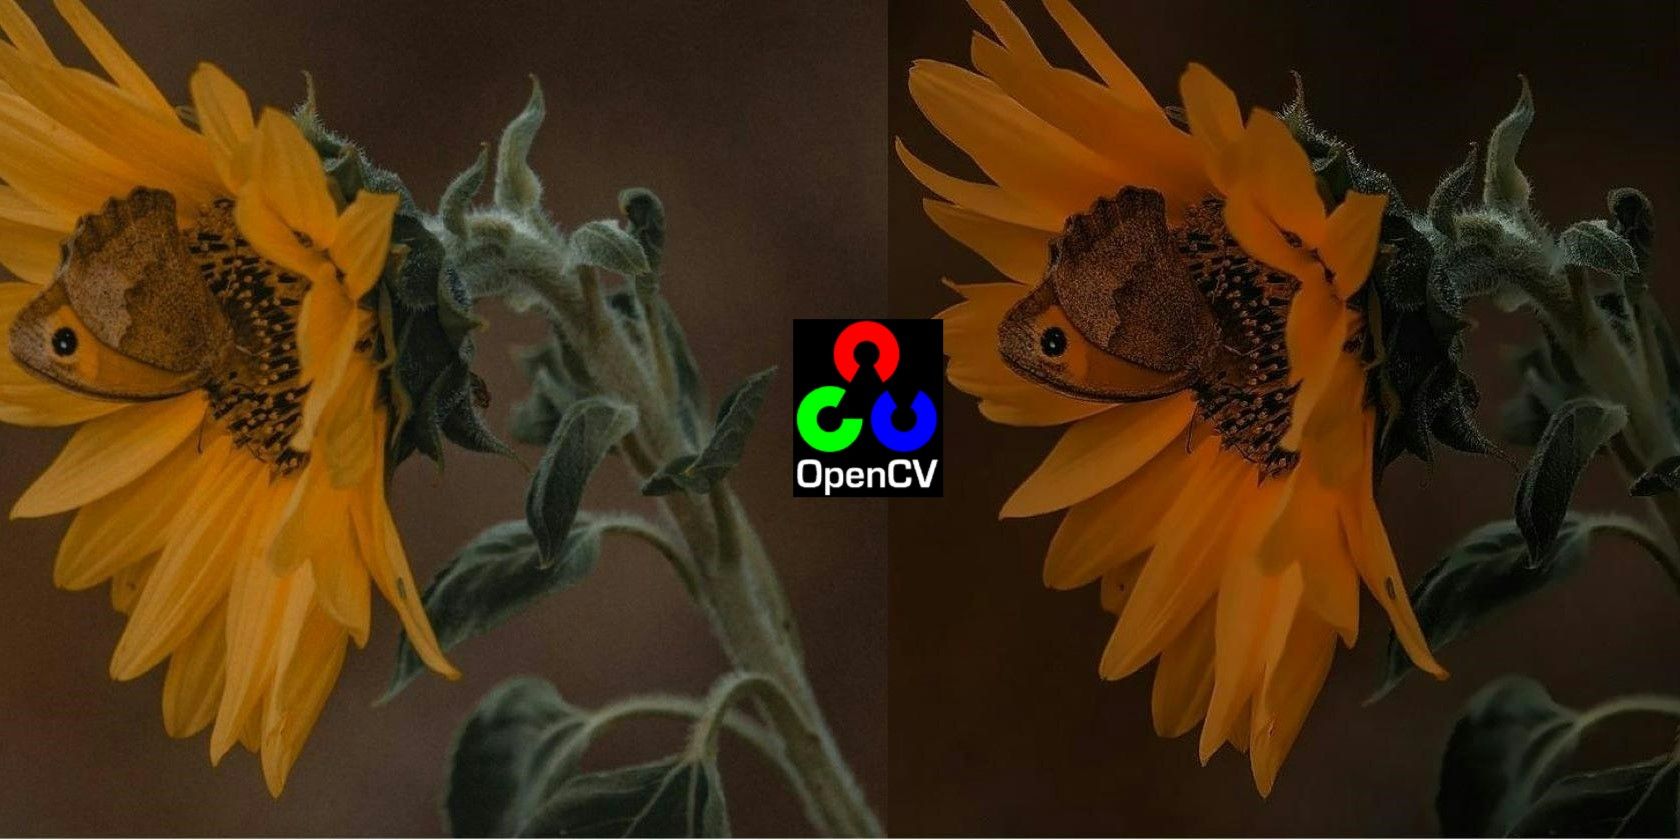 An enhanced sunflower image with OpenCV logo overlayed